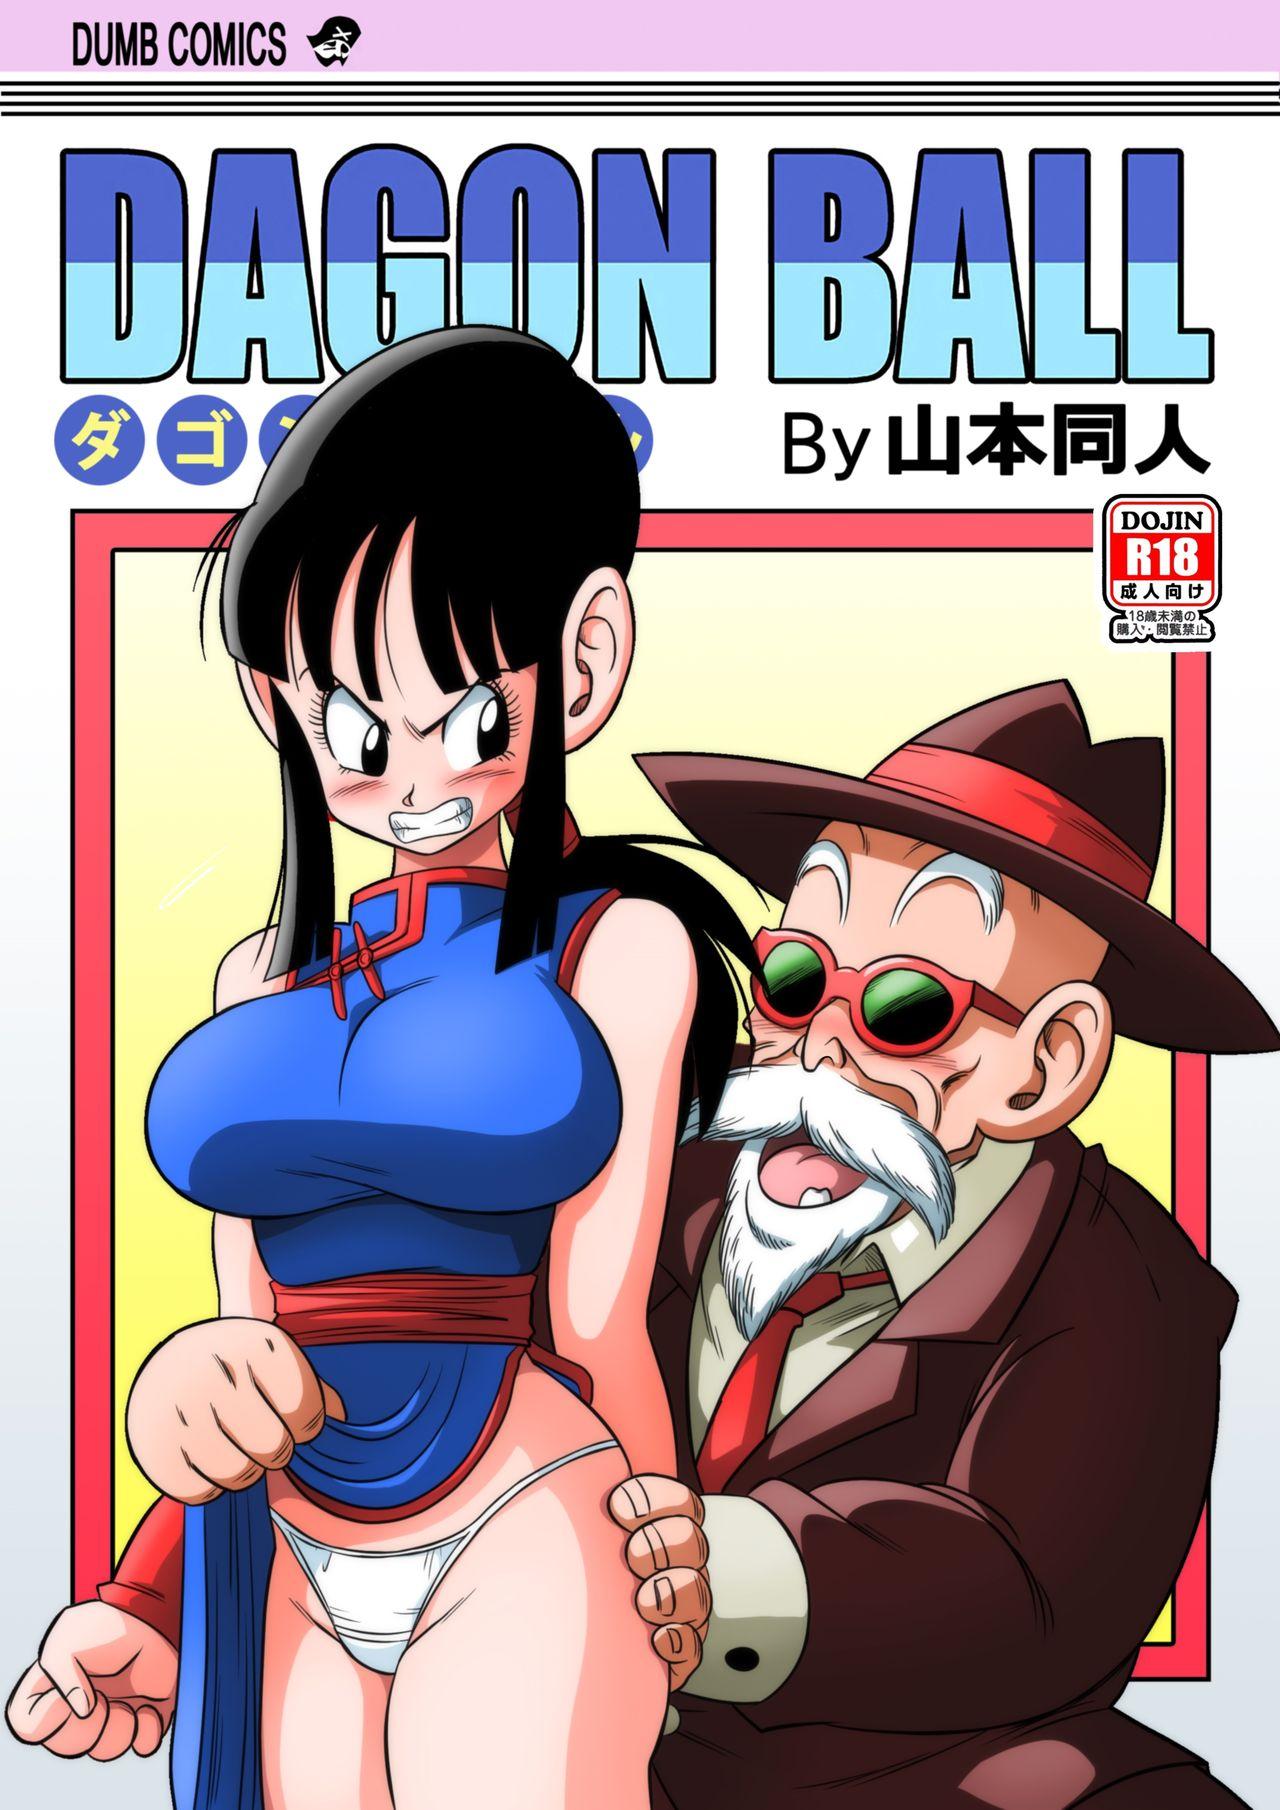 Jacking Off "An Ancient Tradition" - Young Wife is Harassed! - Dragon ball z Dress - Picture 1